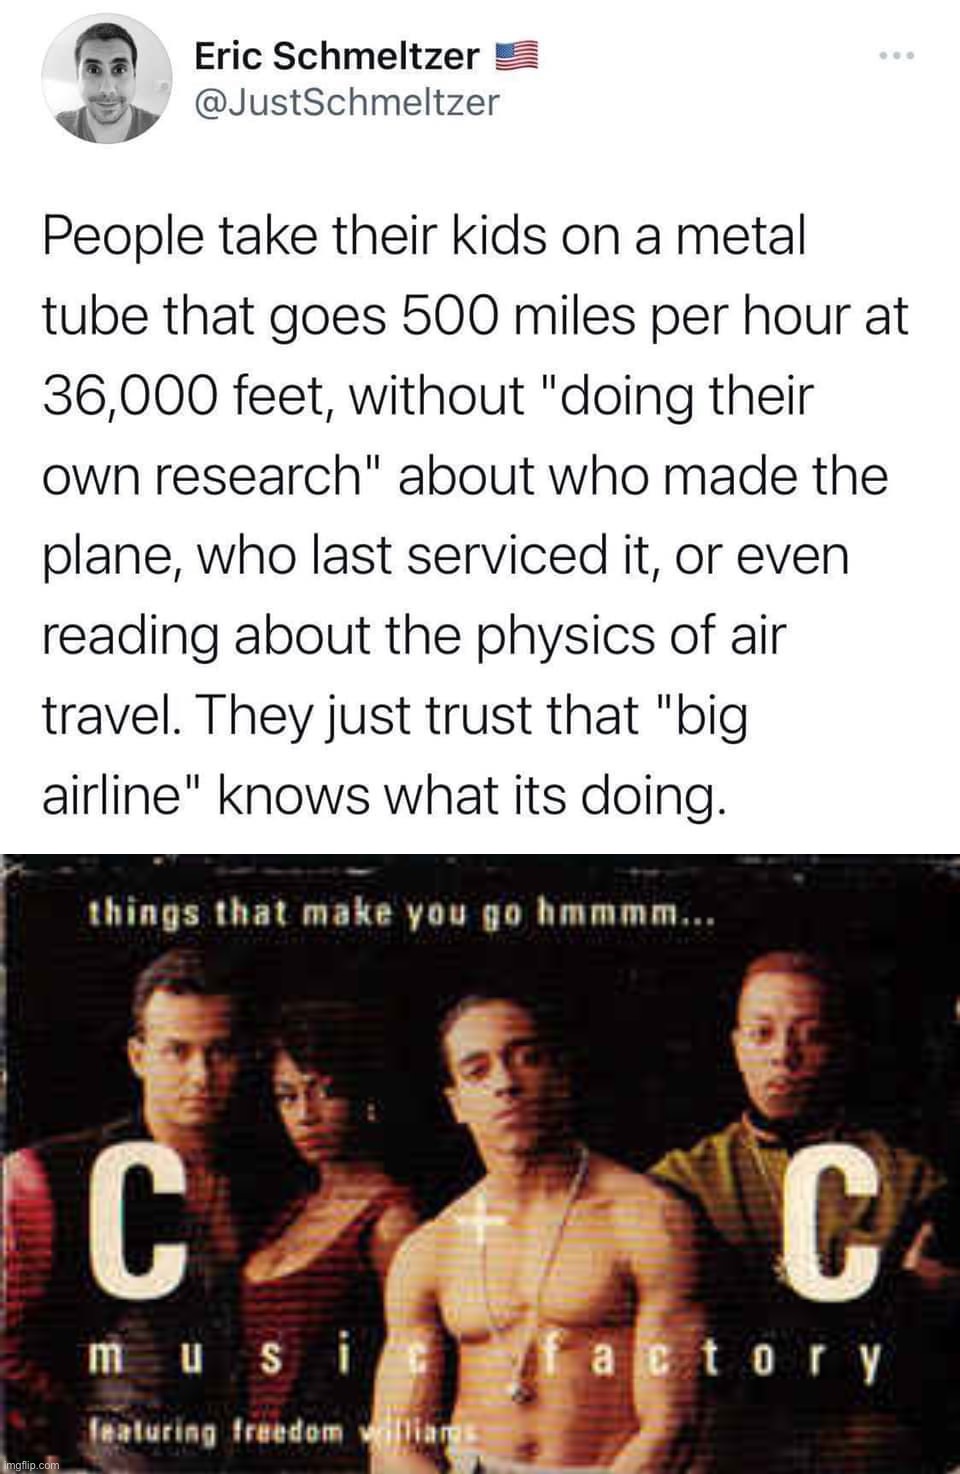 Things that make you go hmmm | image tagged in big airline,things that make you go hmmm | made w/ Imgflip meme maker